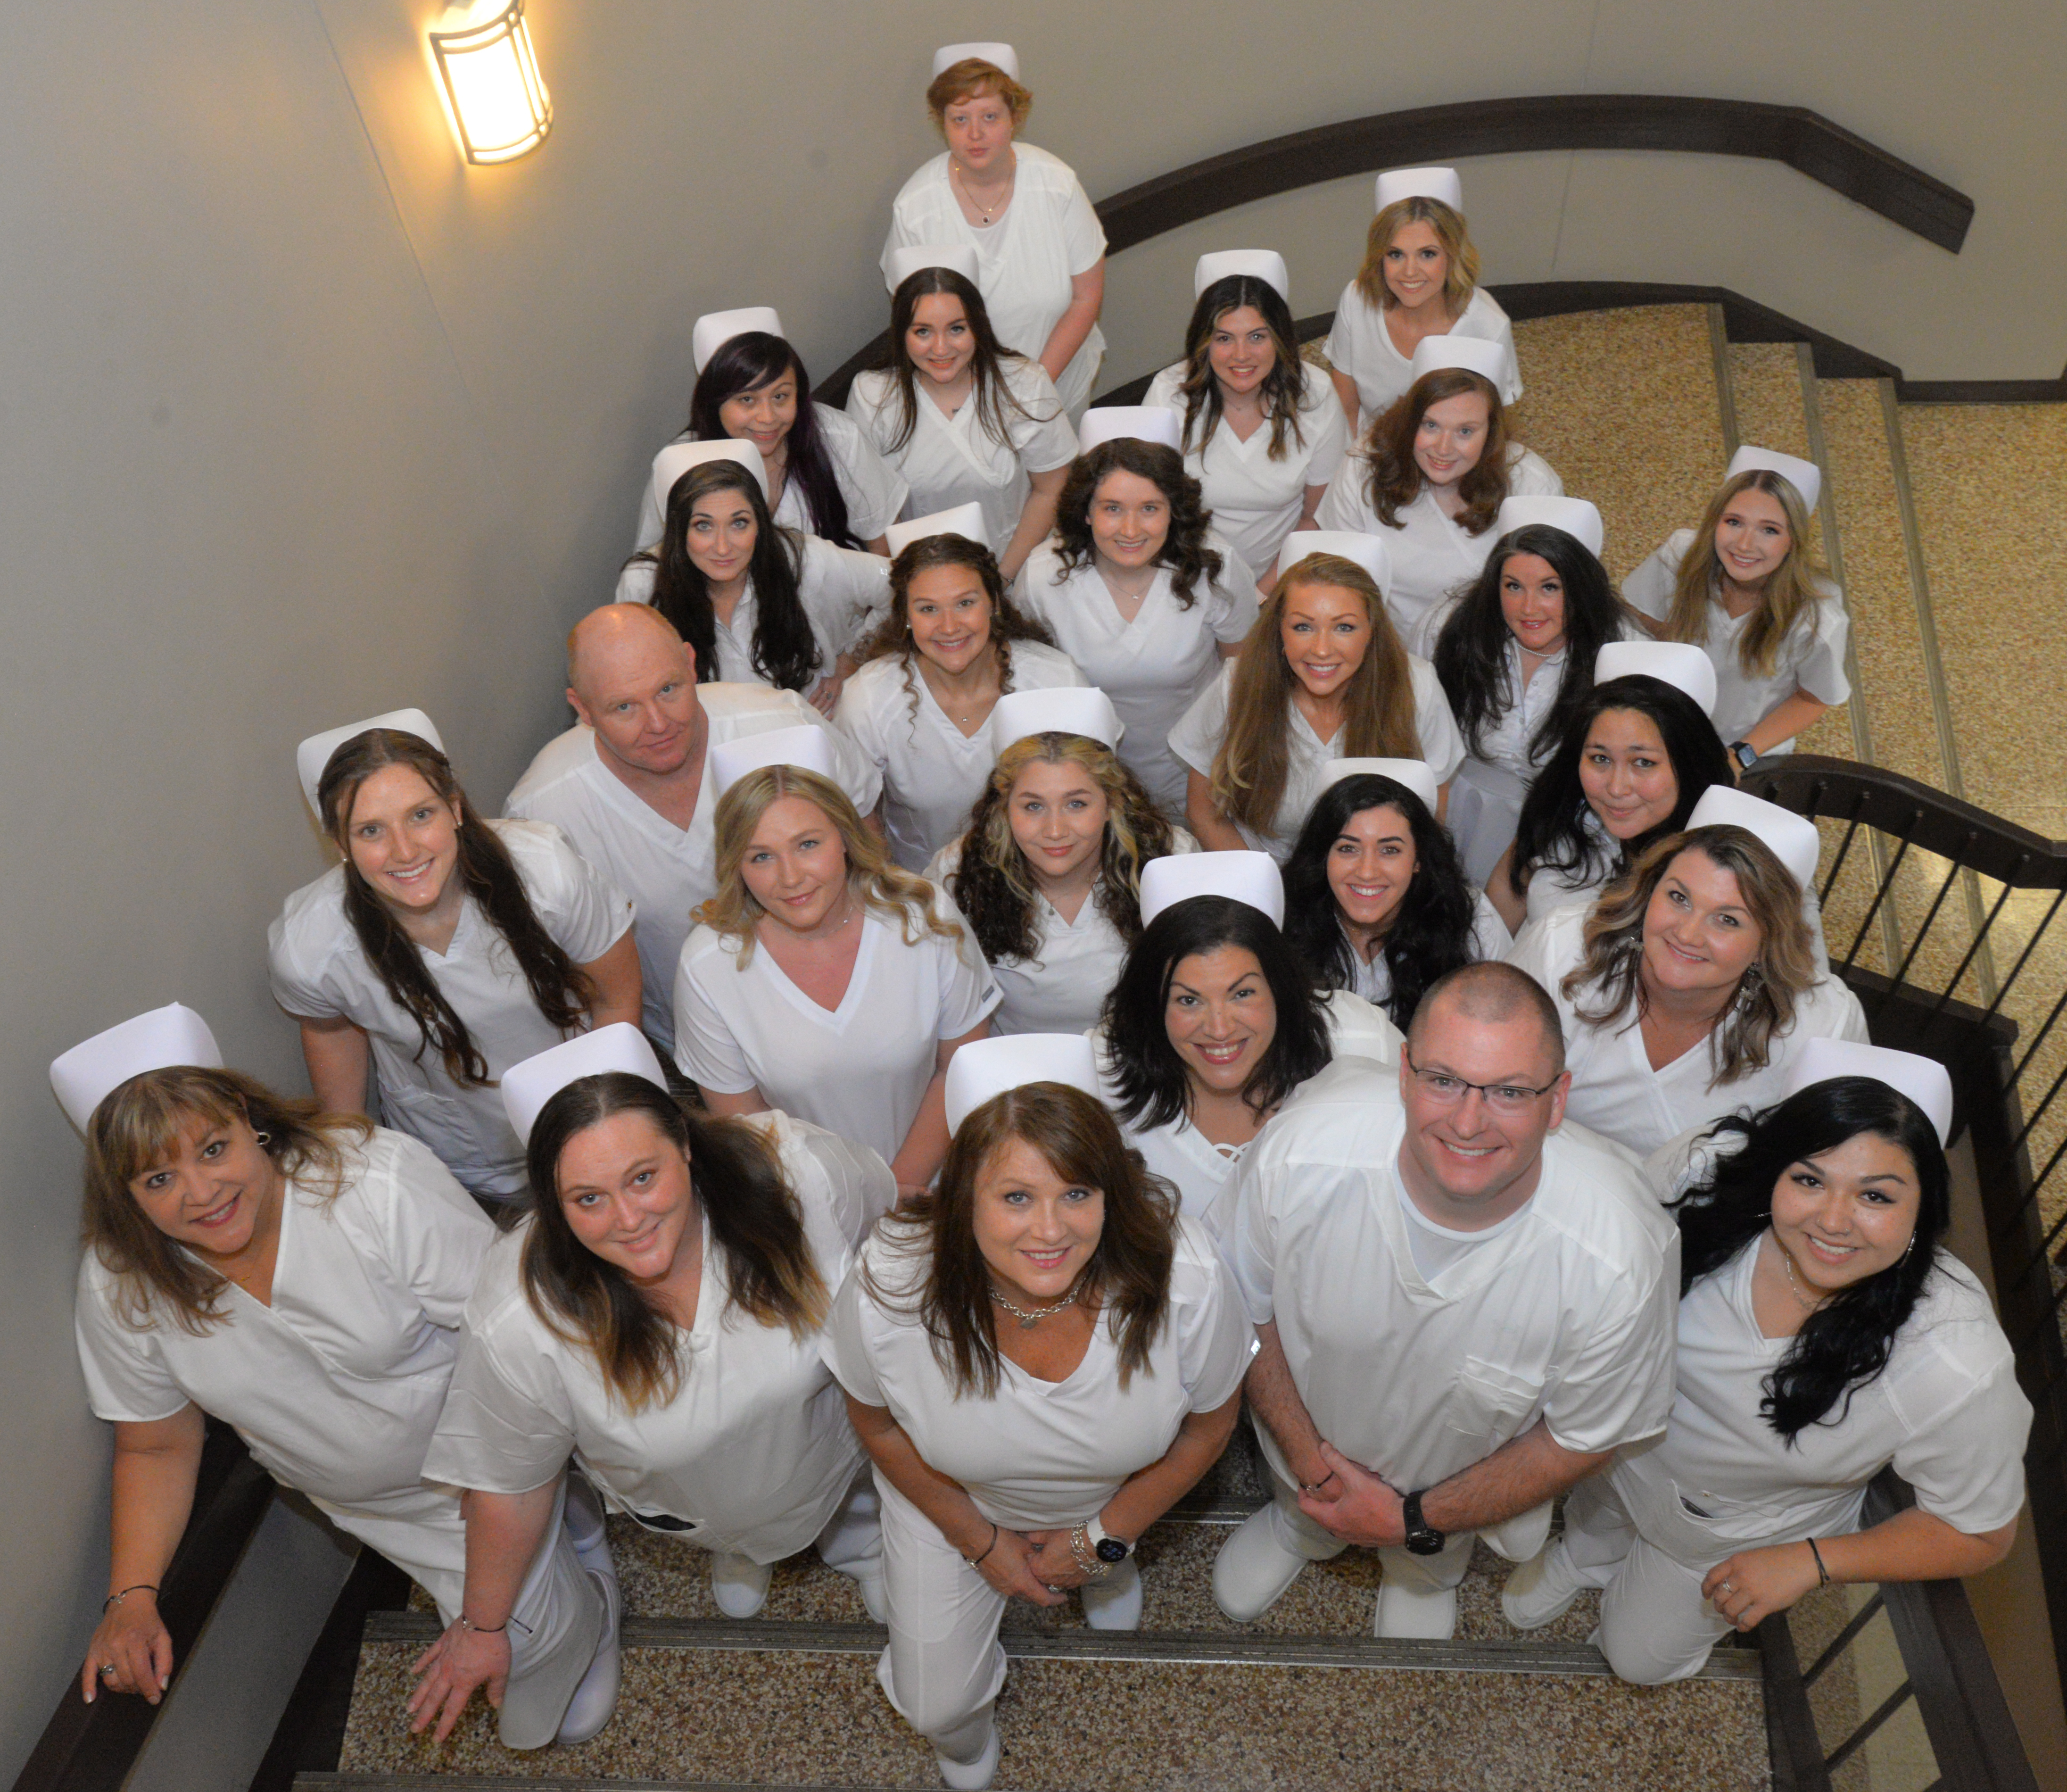 All 25 May graduates of SCC’s Nursing program recently passed their licensure exams. Pictured here are, front row, from left: Beth Bunting of Franklin, Jessica Rodmaker of Bryson City, Patricia Buchanan of Sylva, Amanda Patterson of Robbinsville, David (Nic) Cook of Leicester and Alexandria Patterson of Robbinsville. Second row: Kaitlyn Putnam of Sylva, Daphney Brinkman of Franklin, Amber Sellino of Franklin, Cory Suppa of Bryson City and Rebecca Green of Franklin. Third row: Charles Smith of Robbinsvile, Kari Putnam of Sylva, Ashley Buchanan of Franklin, Hayley Moralez of Franklin and Katie Moore of Waynesville. Fourth row: Hillary Foster of Almond, Deanah Smith of Whittier, Sarah Brown of Greensboro and Kennedy Sorrells of Canton. Fifth row: Jennifer Carey of Cherokee, Leah Carter of Franklin, Elizabeth Cartwright of Canton and Kassandra Matthews of Bryson City. Back row: Melissa Quiletorio of Franklin.